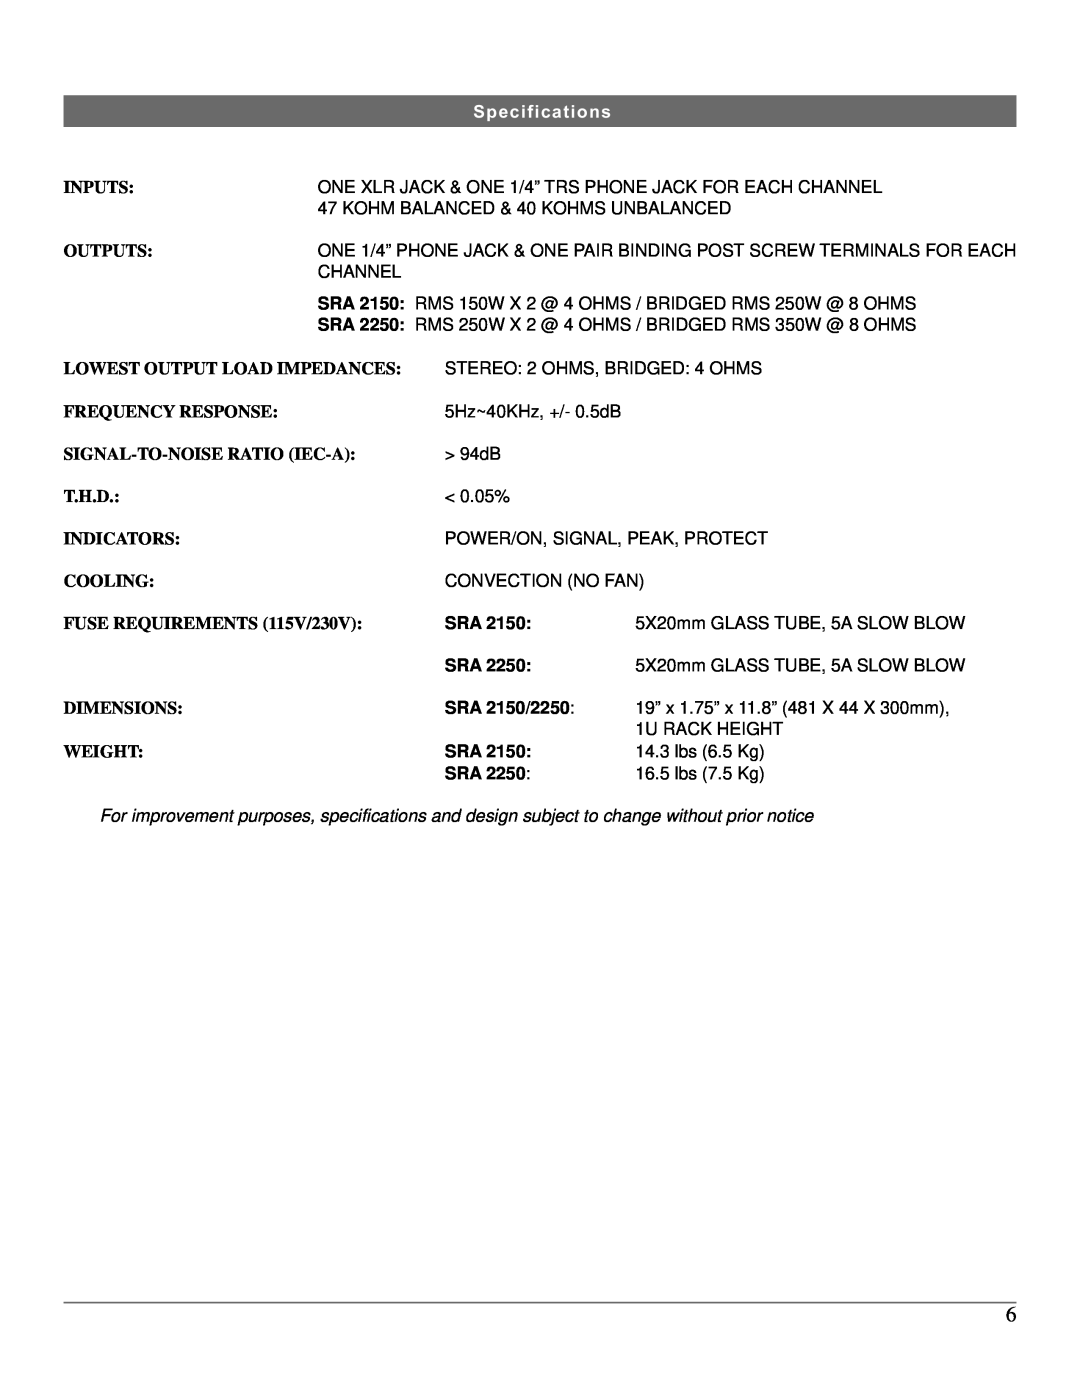 Nady Systems SRA 2250 manual Specifications, SRA 2150/2250 